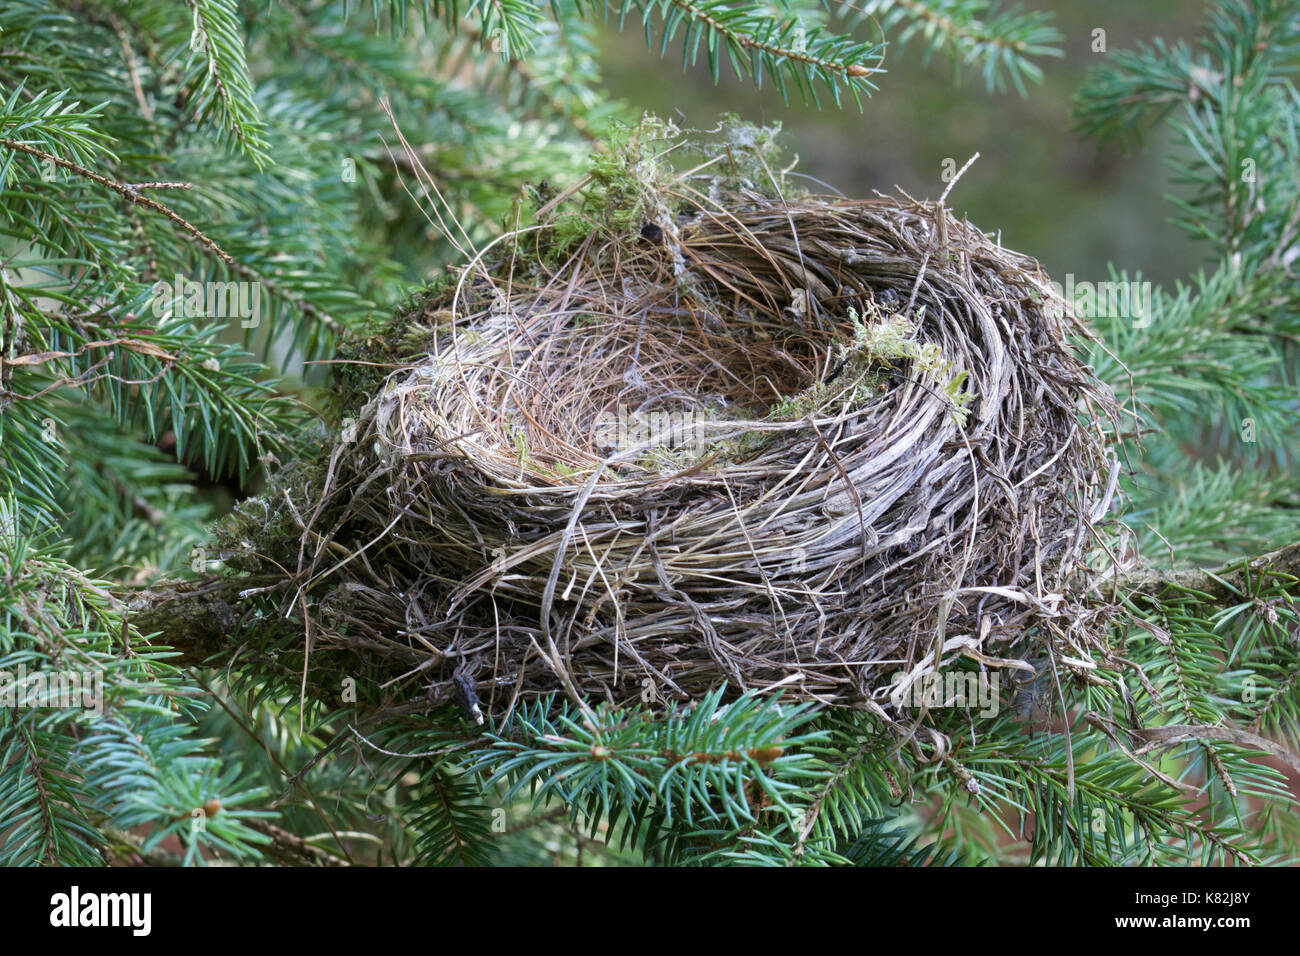 The empty nest.  The baby birds have hatched and flown away.  Empty nester parents can feel sad when their children grow up and leave the family home. Stock Photo